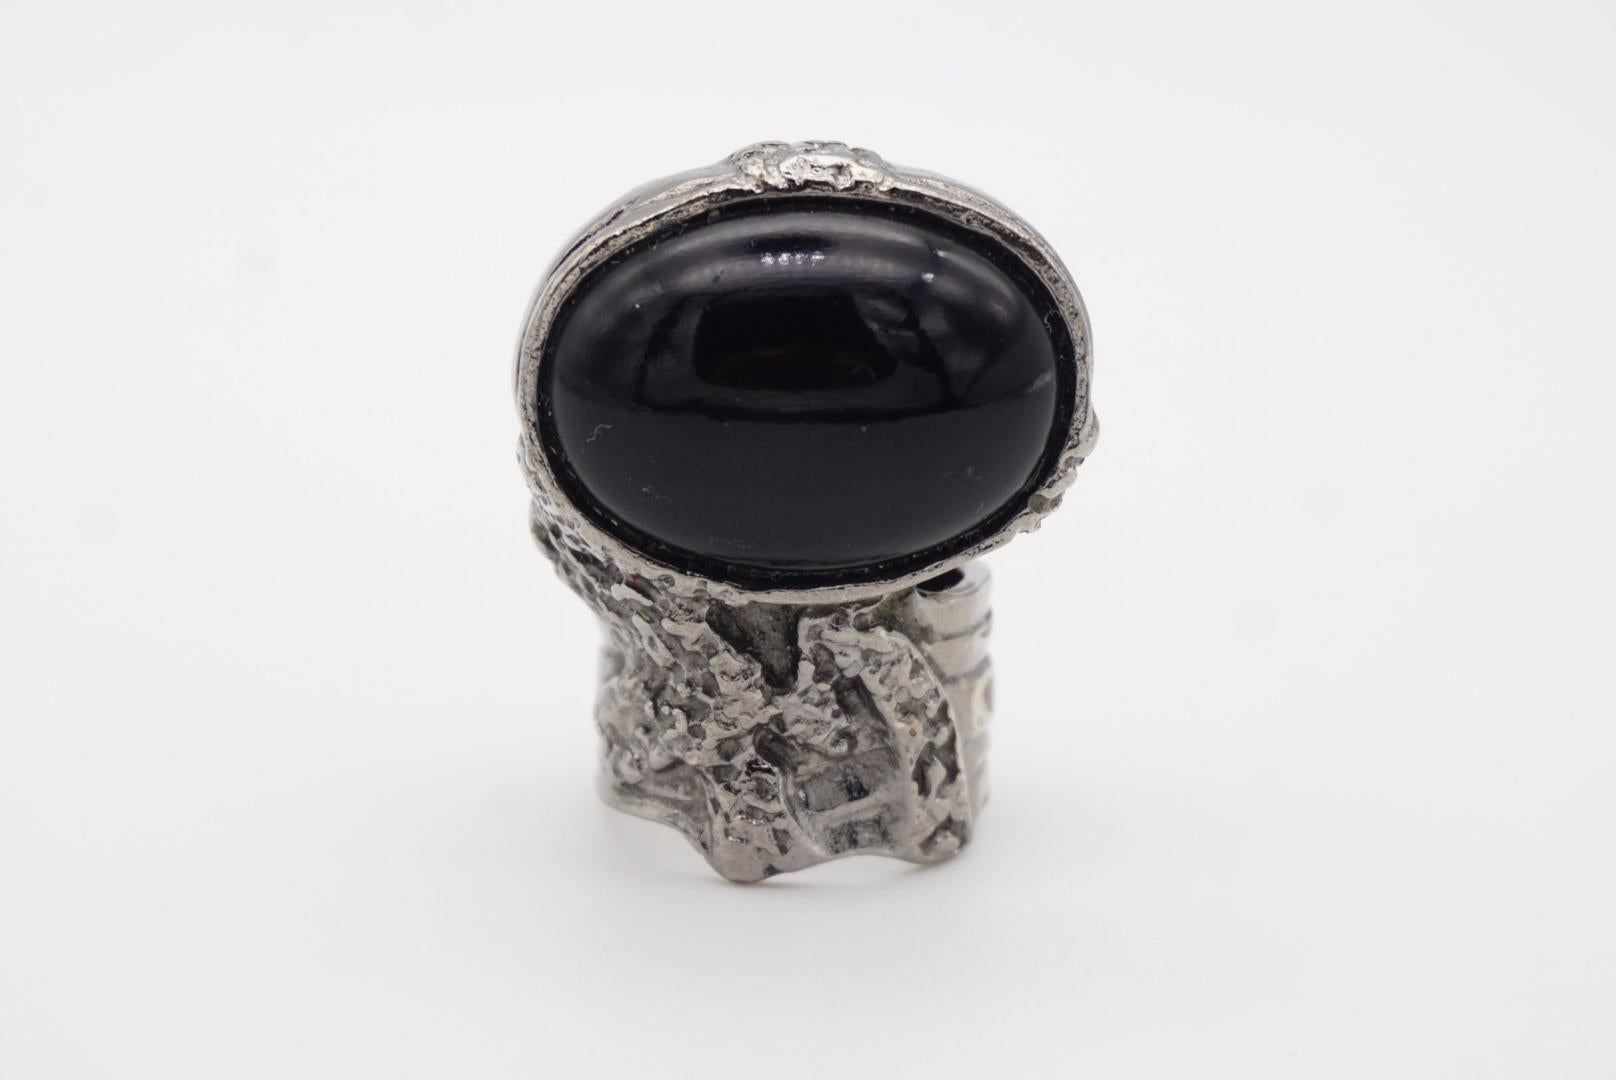 Georgian Yves Saint Laurent YSL Arty Black Cabochon Chunky Statement Silver Ring, Size 6 For Sale